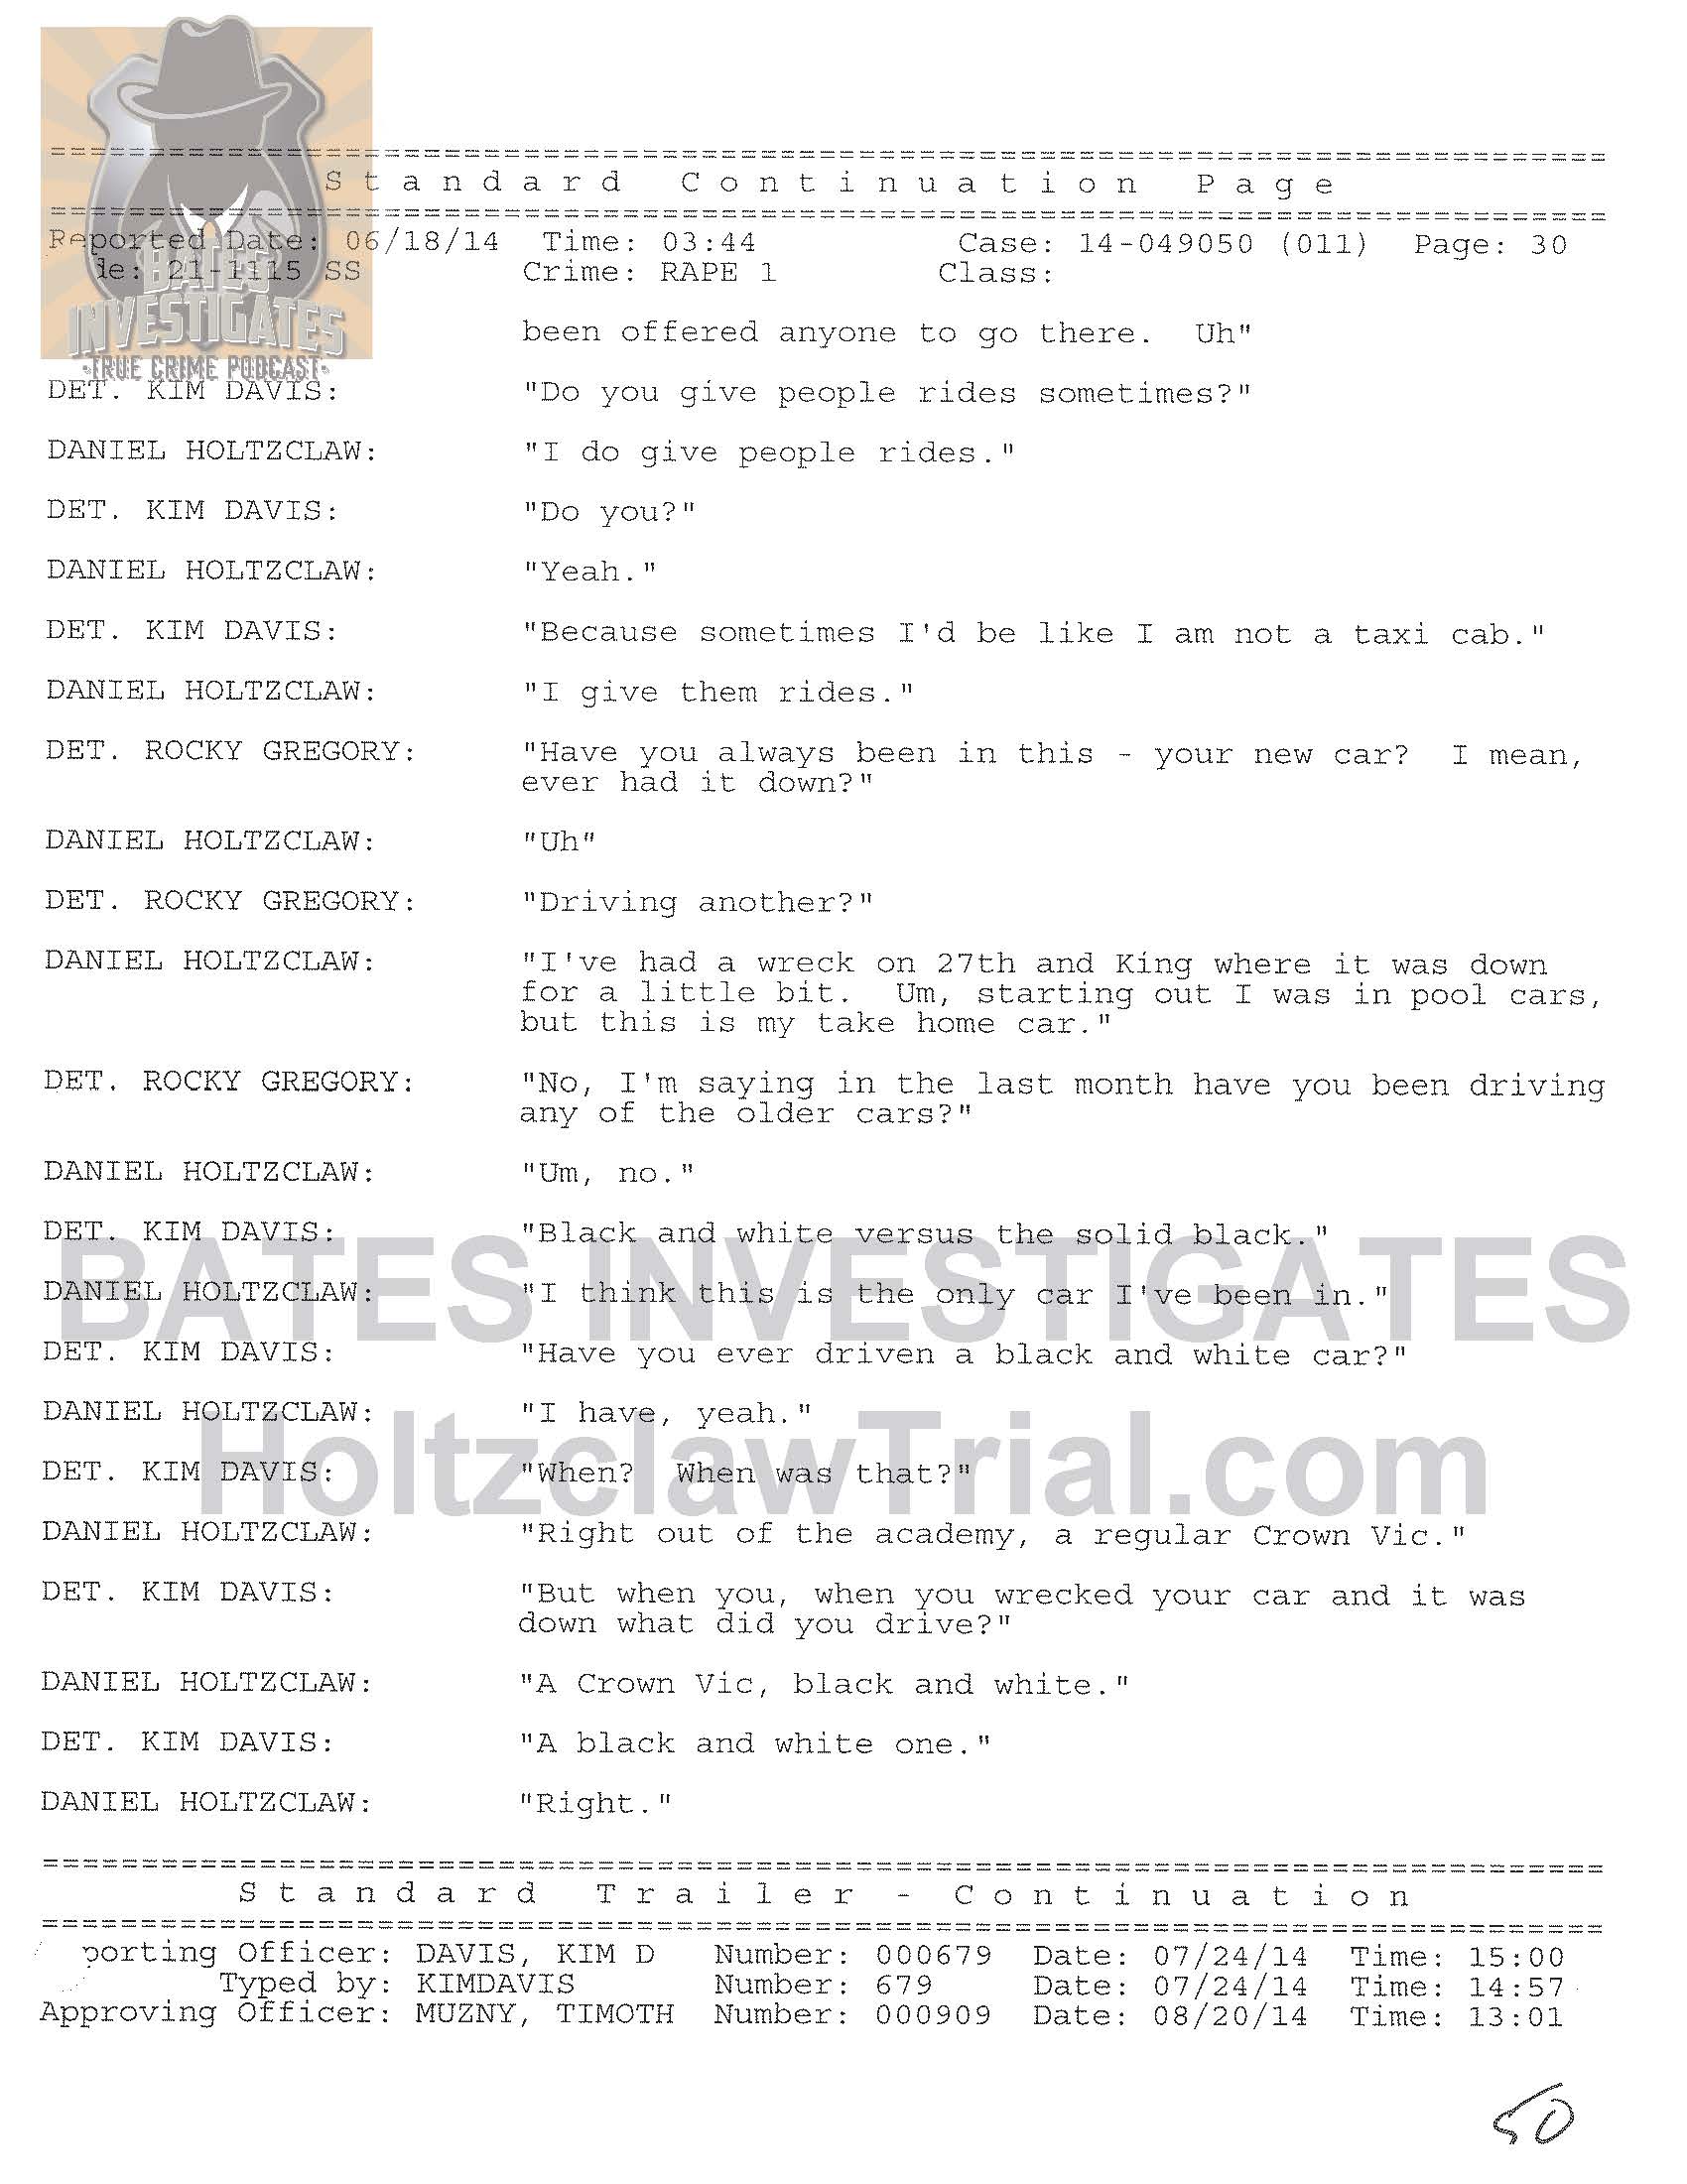 Holtzclaw Interrogation Transcript - Ep02 Redacted_Page_30.jpg